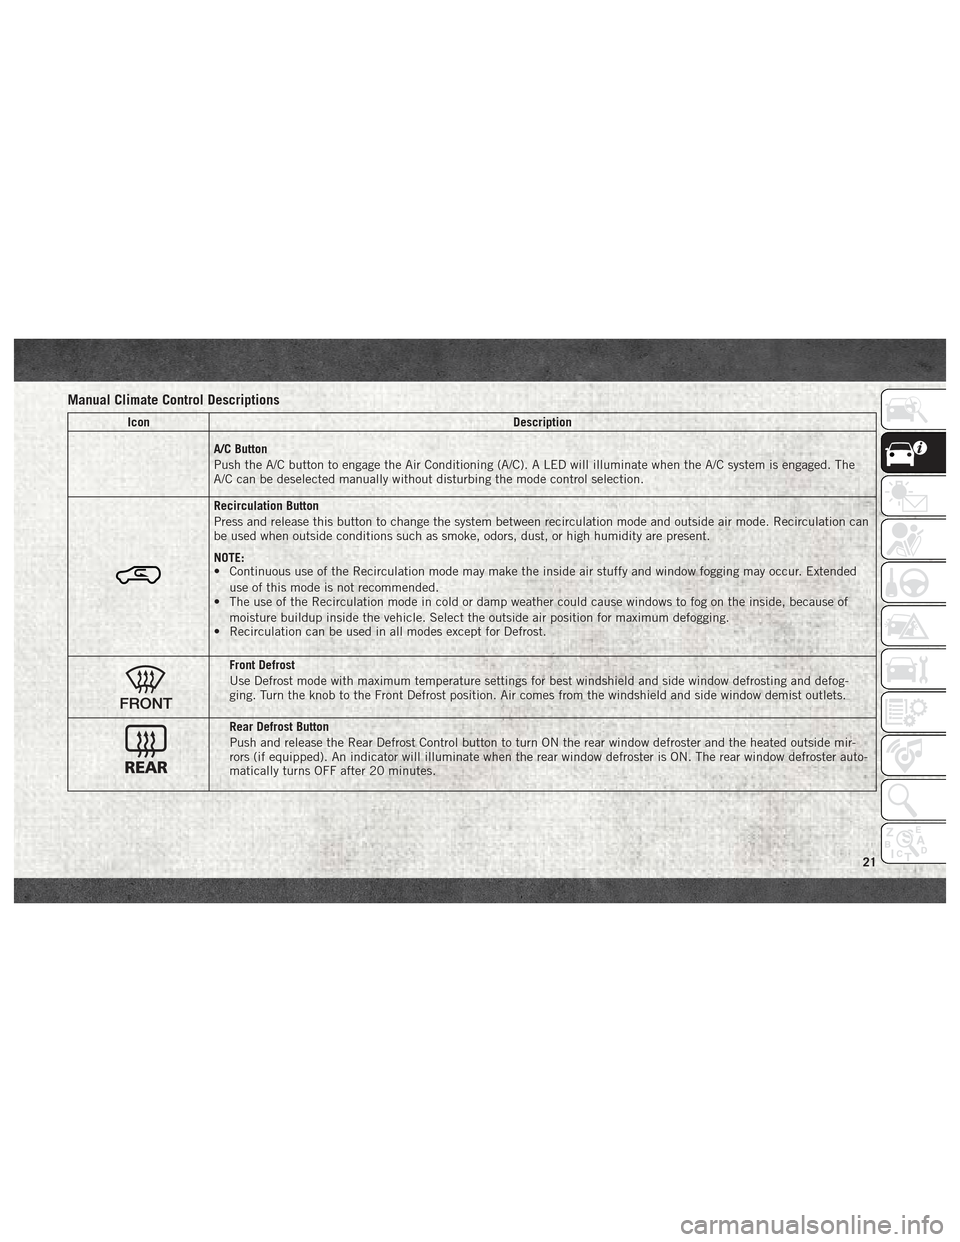 Ram ProMaster City 2018  User Guide Manual Climate Control Descriptions
IconDescription
A/C Button
Push the A/C button to engage the Air Conditioning (A/C). A LED will illuminate when the A/C system is engaged. The
A/C can be deselected